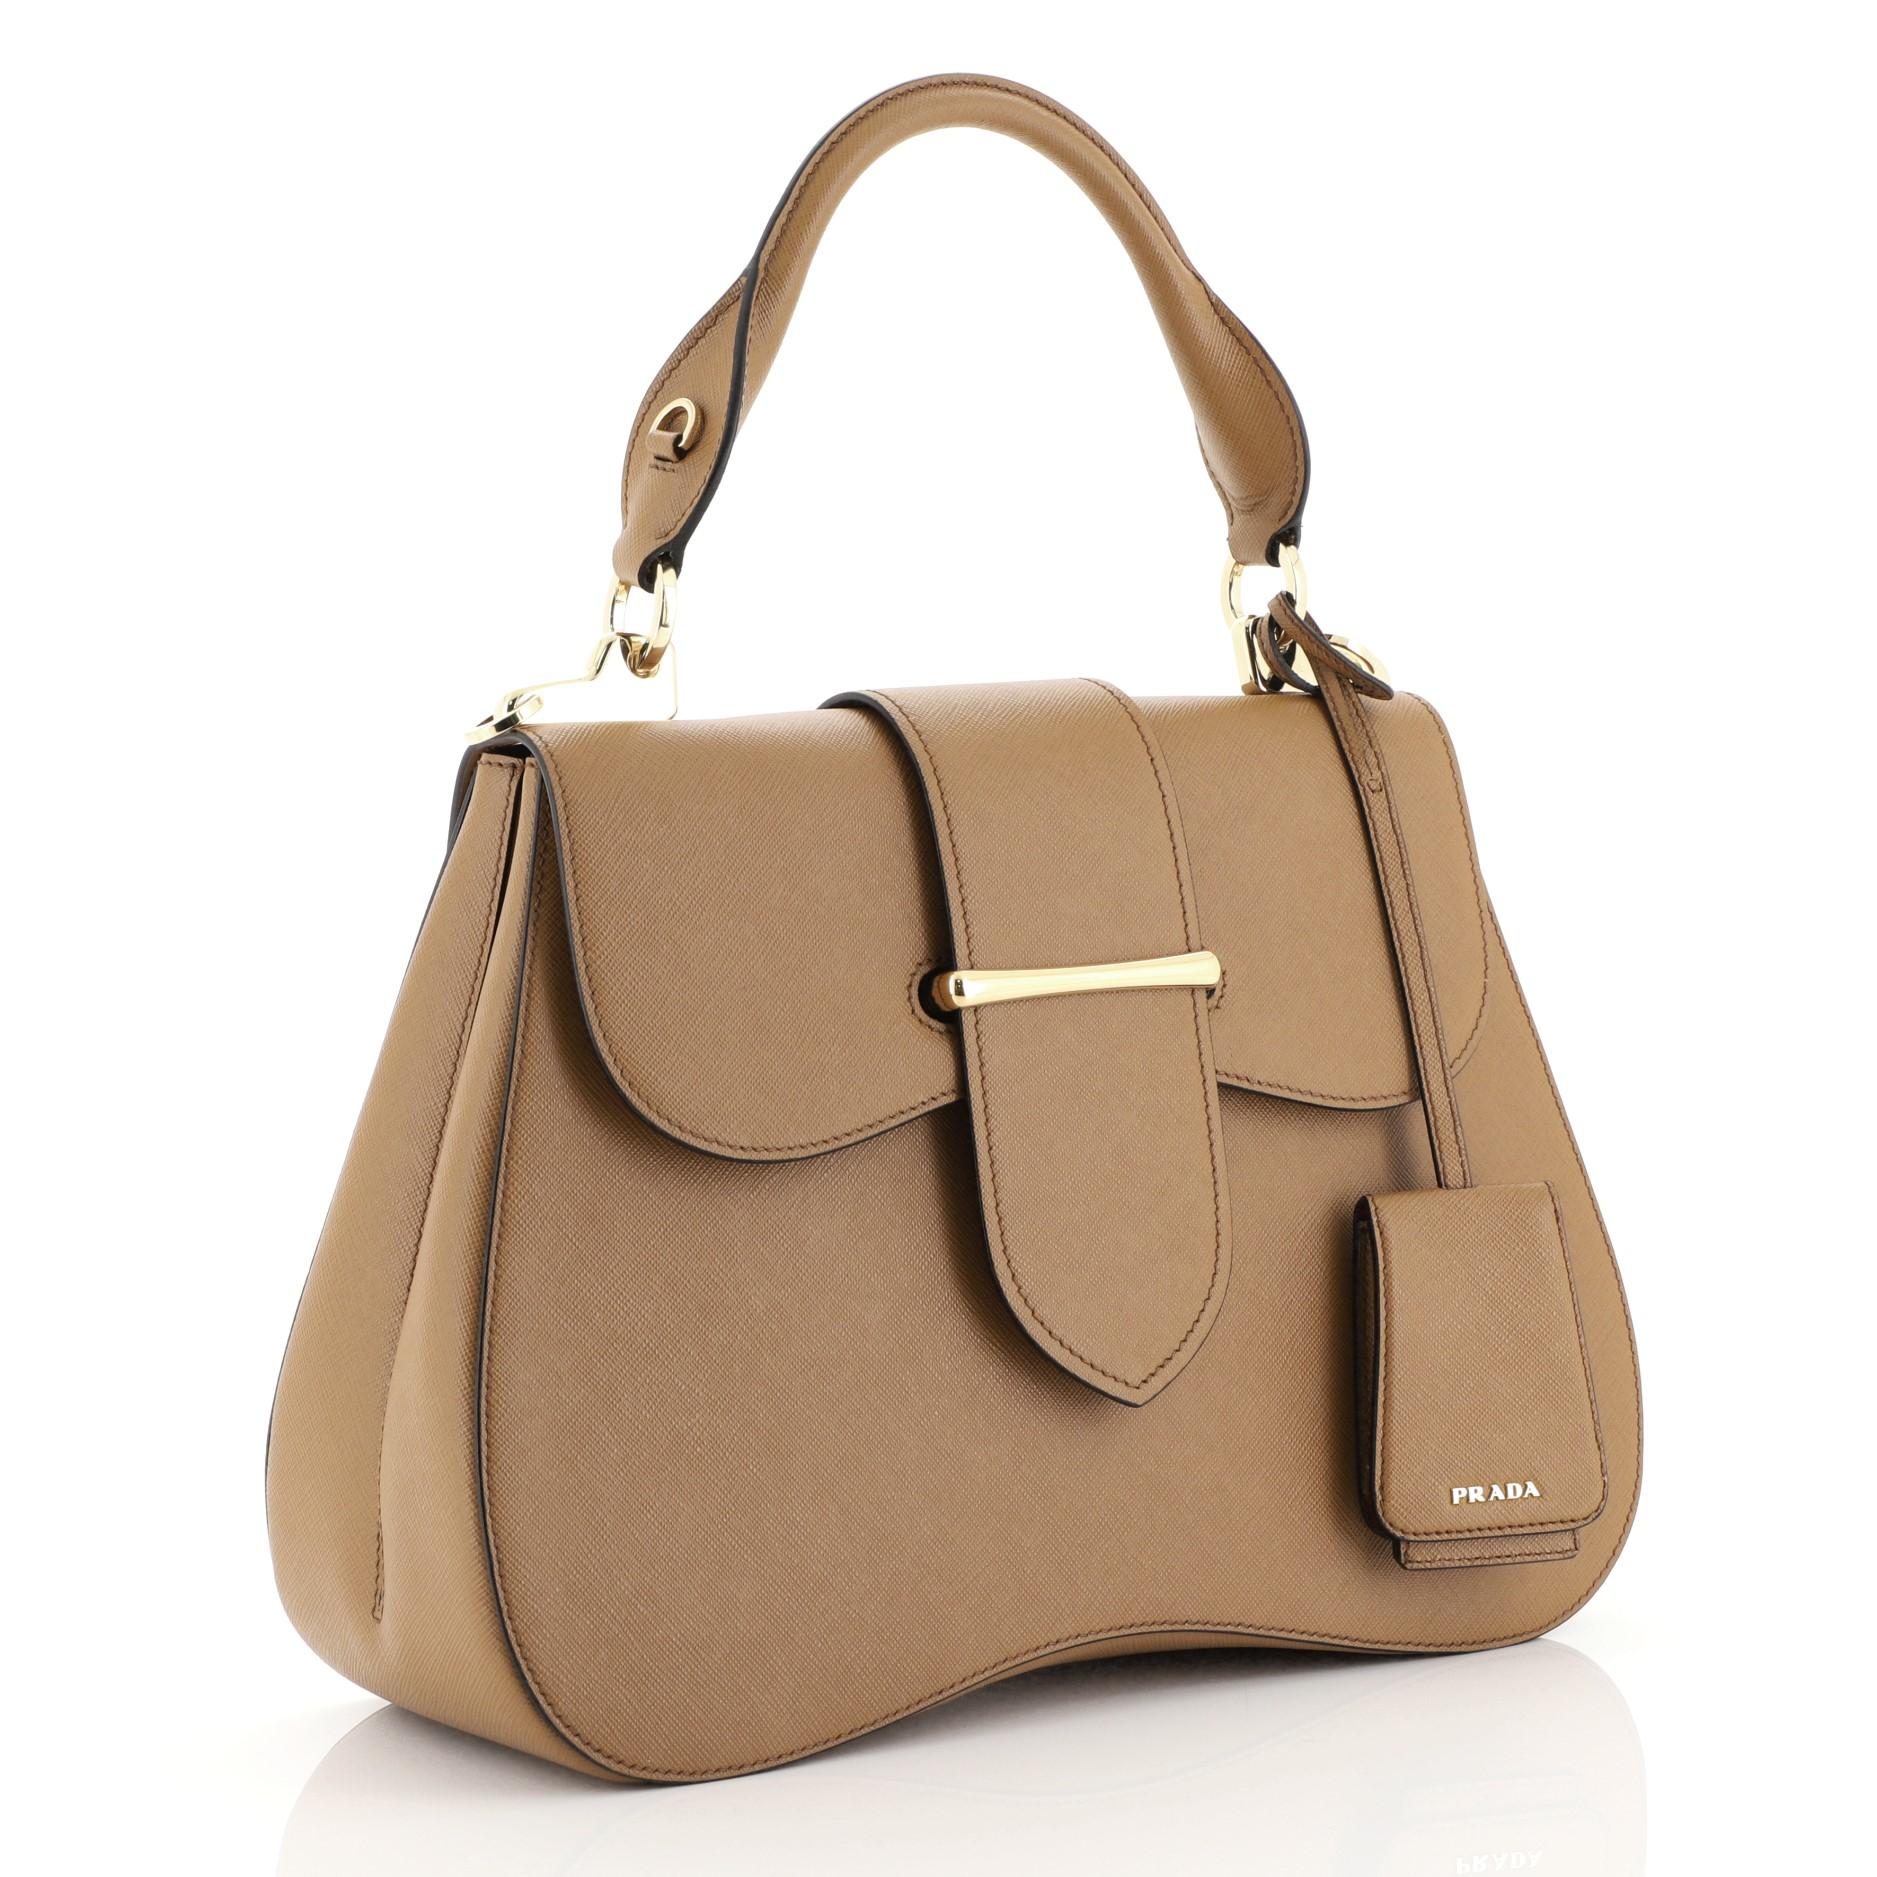 This Prada Sidonie Top Handle Bag Saffiano Leather Large, crafted from brown saffiano leather, features a rolled top handle and gold-tone hardware. Its flap opens to a red leather interior with side zip and slip pockets. 

Estimated Retail Price: